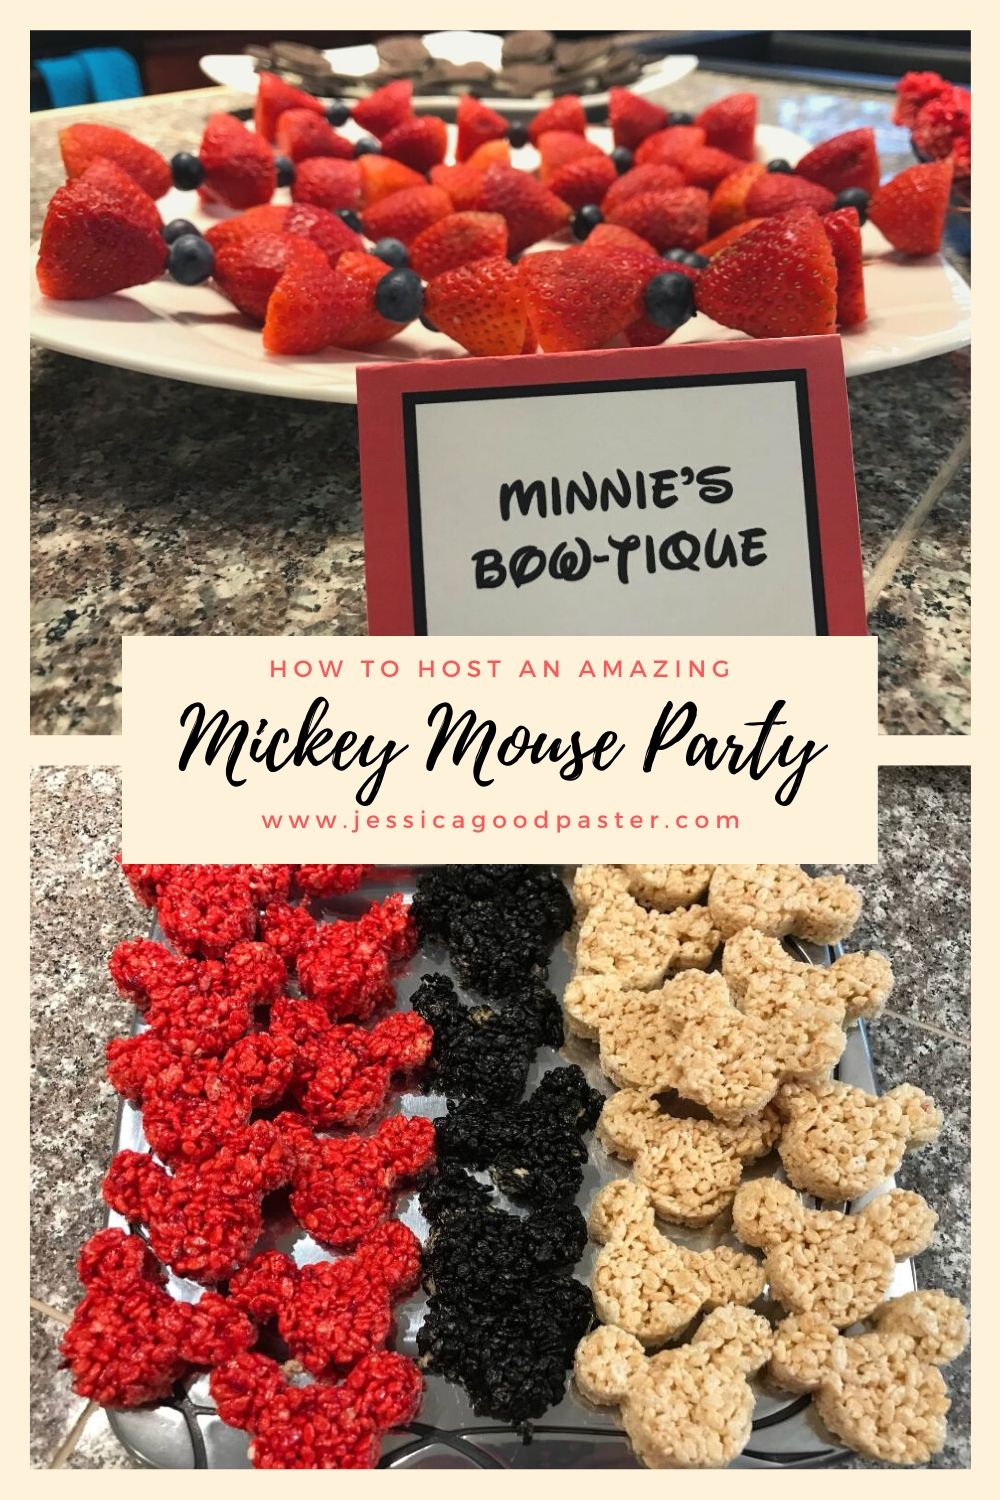 How To Host An Amazing Mickey Mouse Party On A Budget Jessicagoodpaster Com